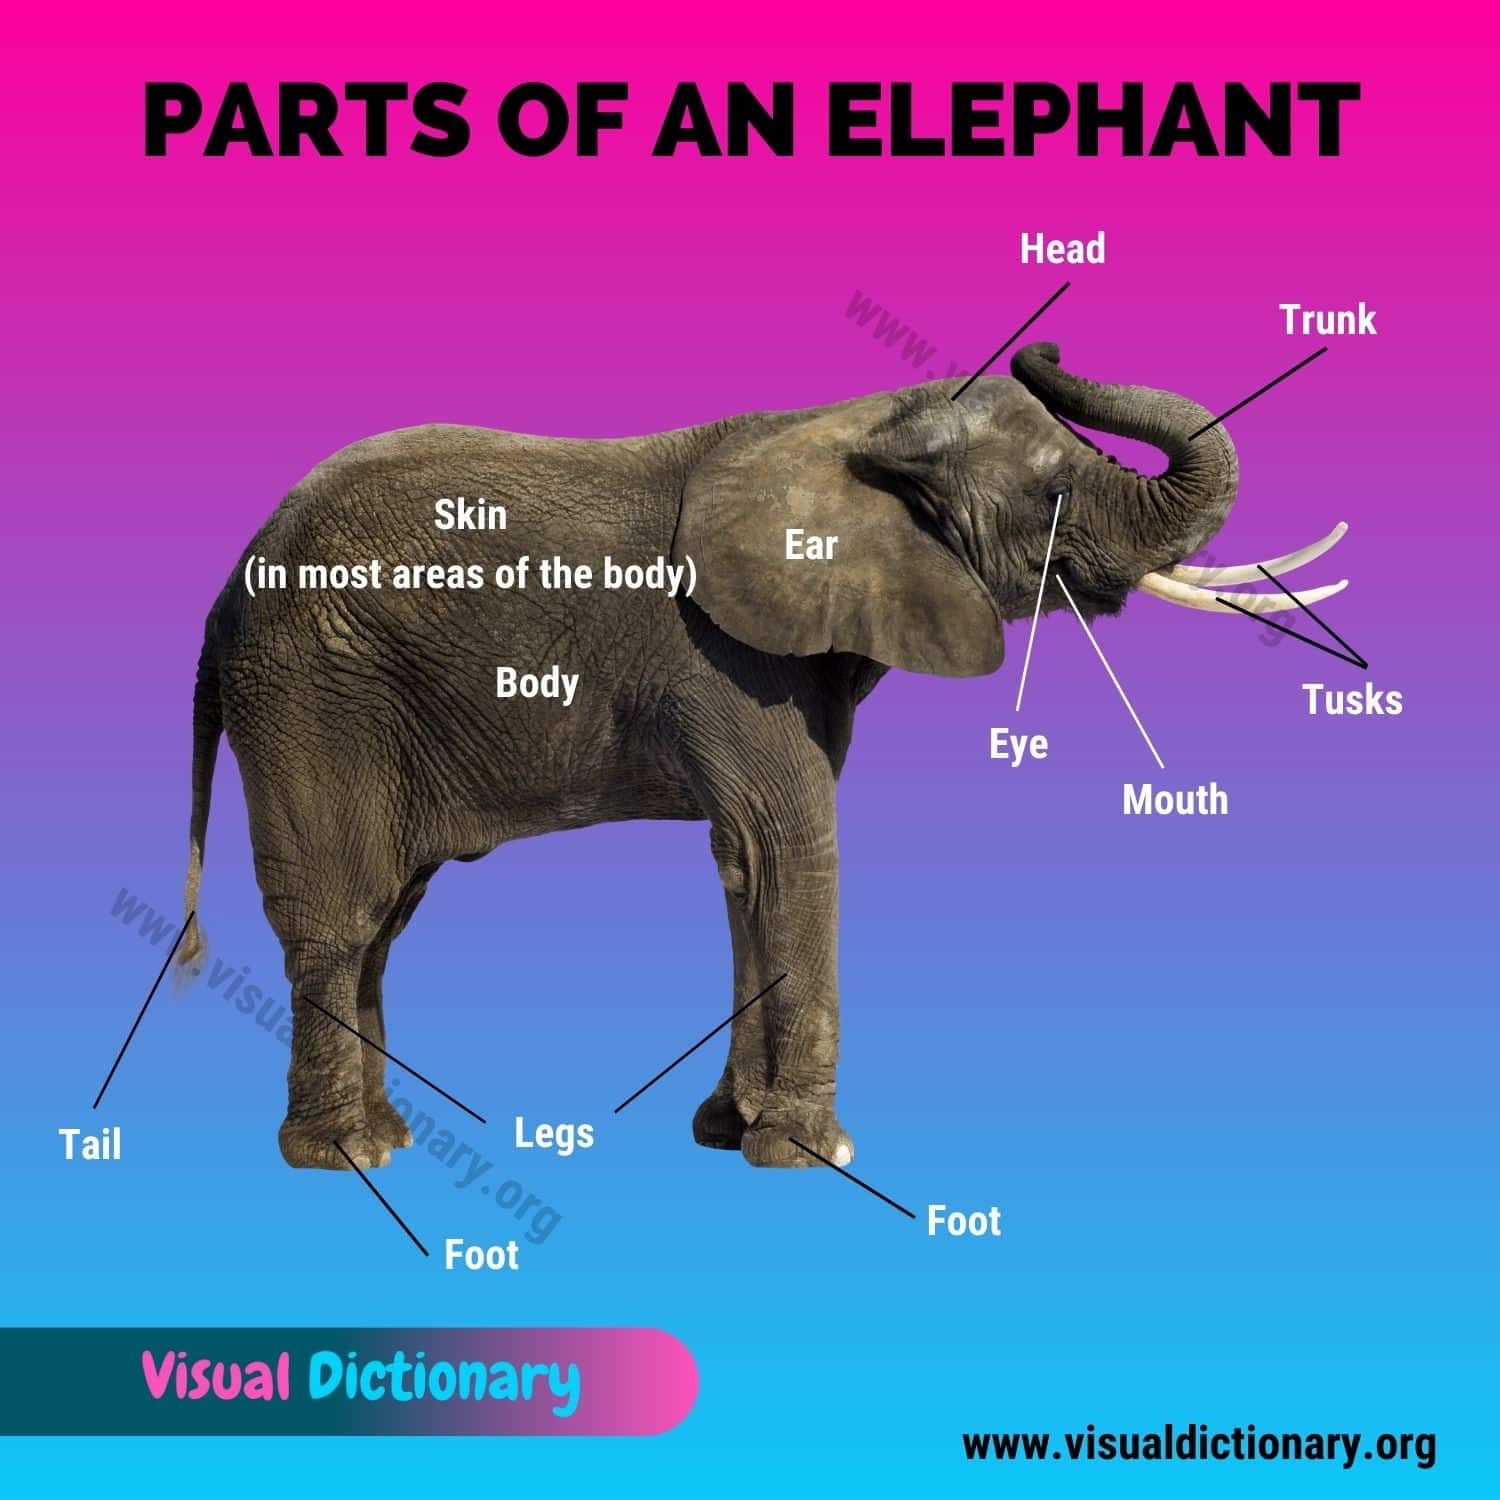 Elephant Parts: Great List of 12 Parts of an Elephant